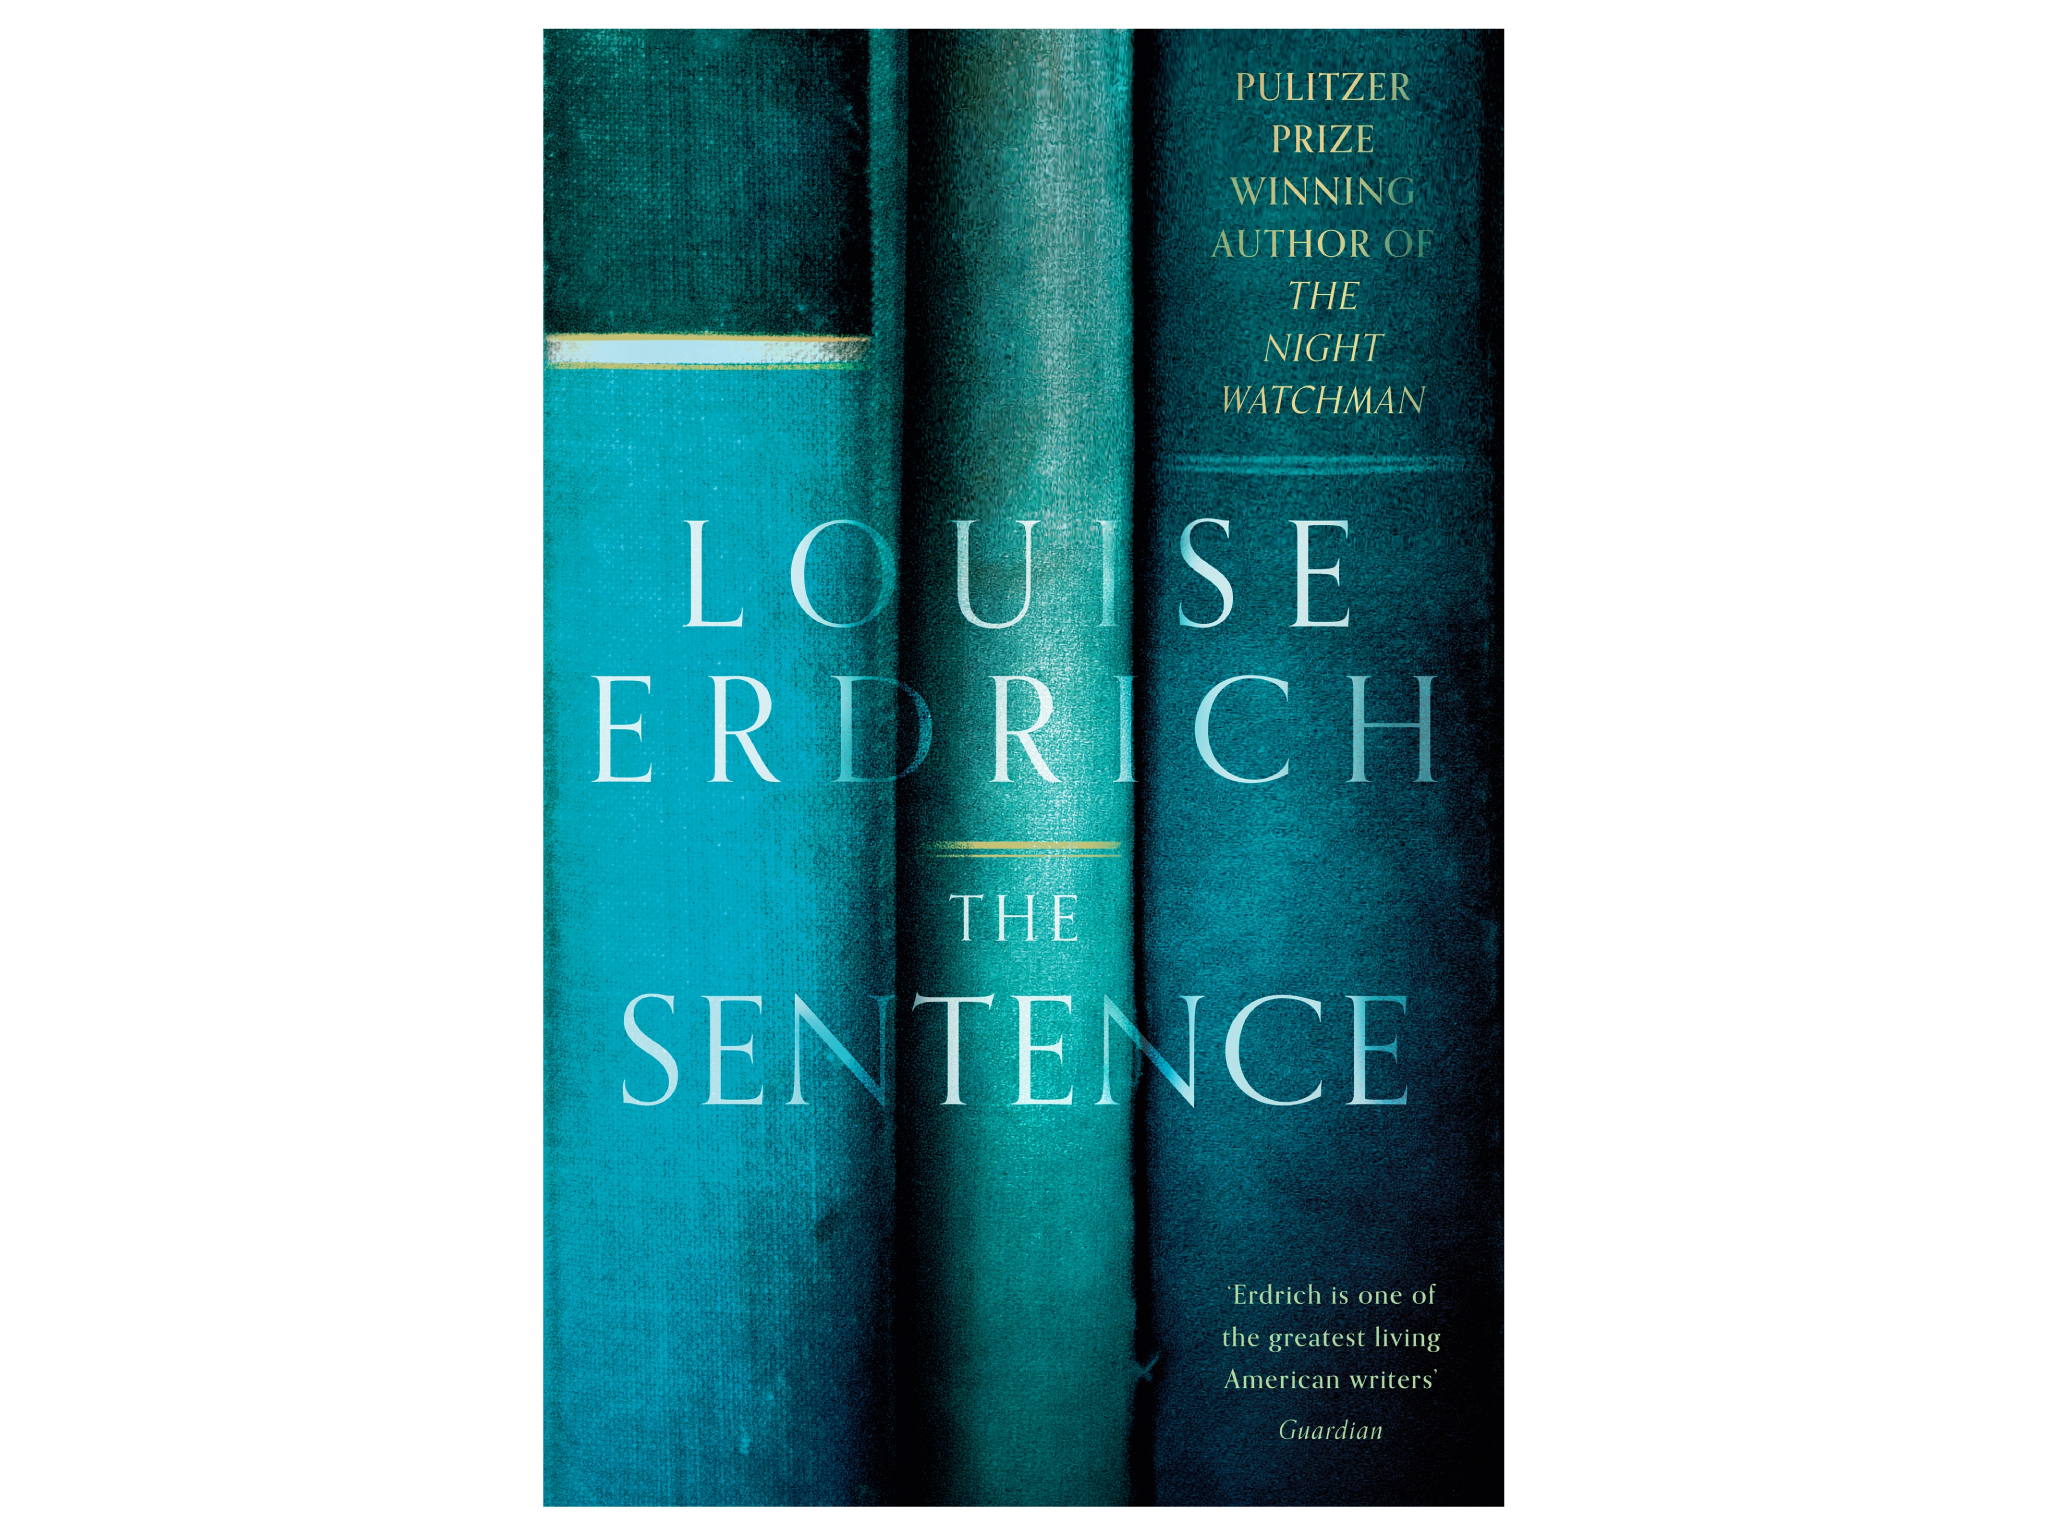 The-Sentence-womens-prize-for-fiction-longlist-indybest